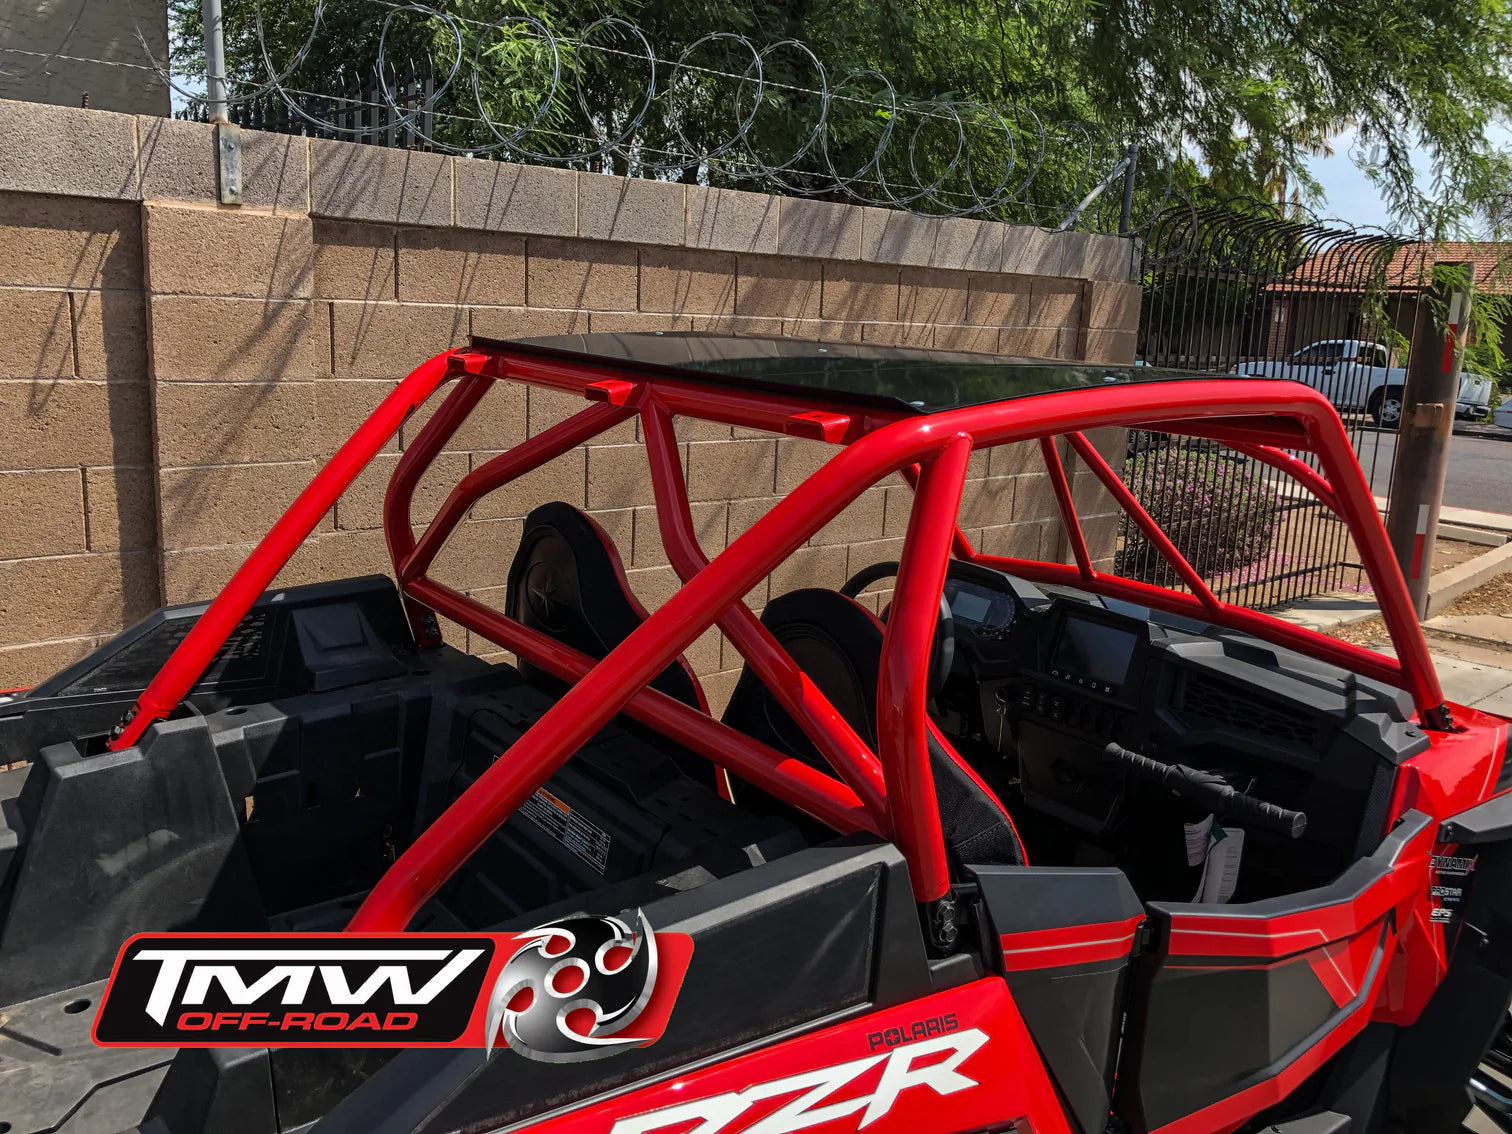 TMW Sand Slayer speed style 2 Seat Cage (fits 2019 Turbo S and 2019 RZR models) - G Life UTV Shop Parts